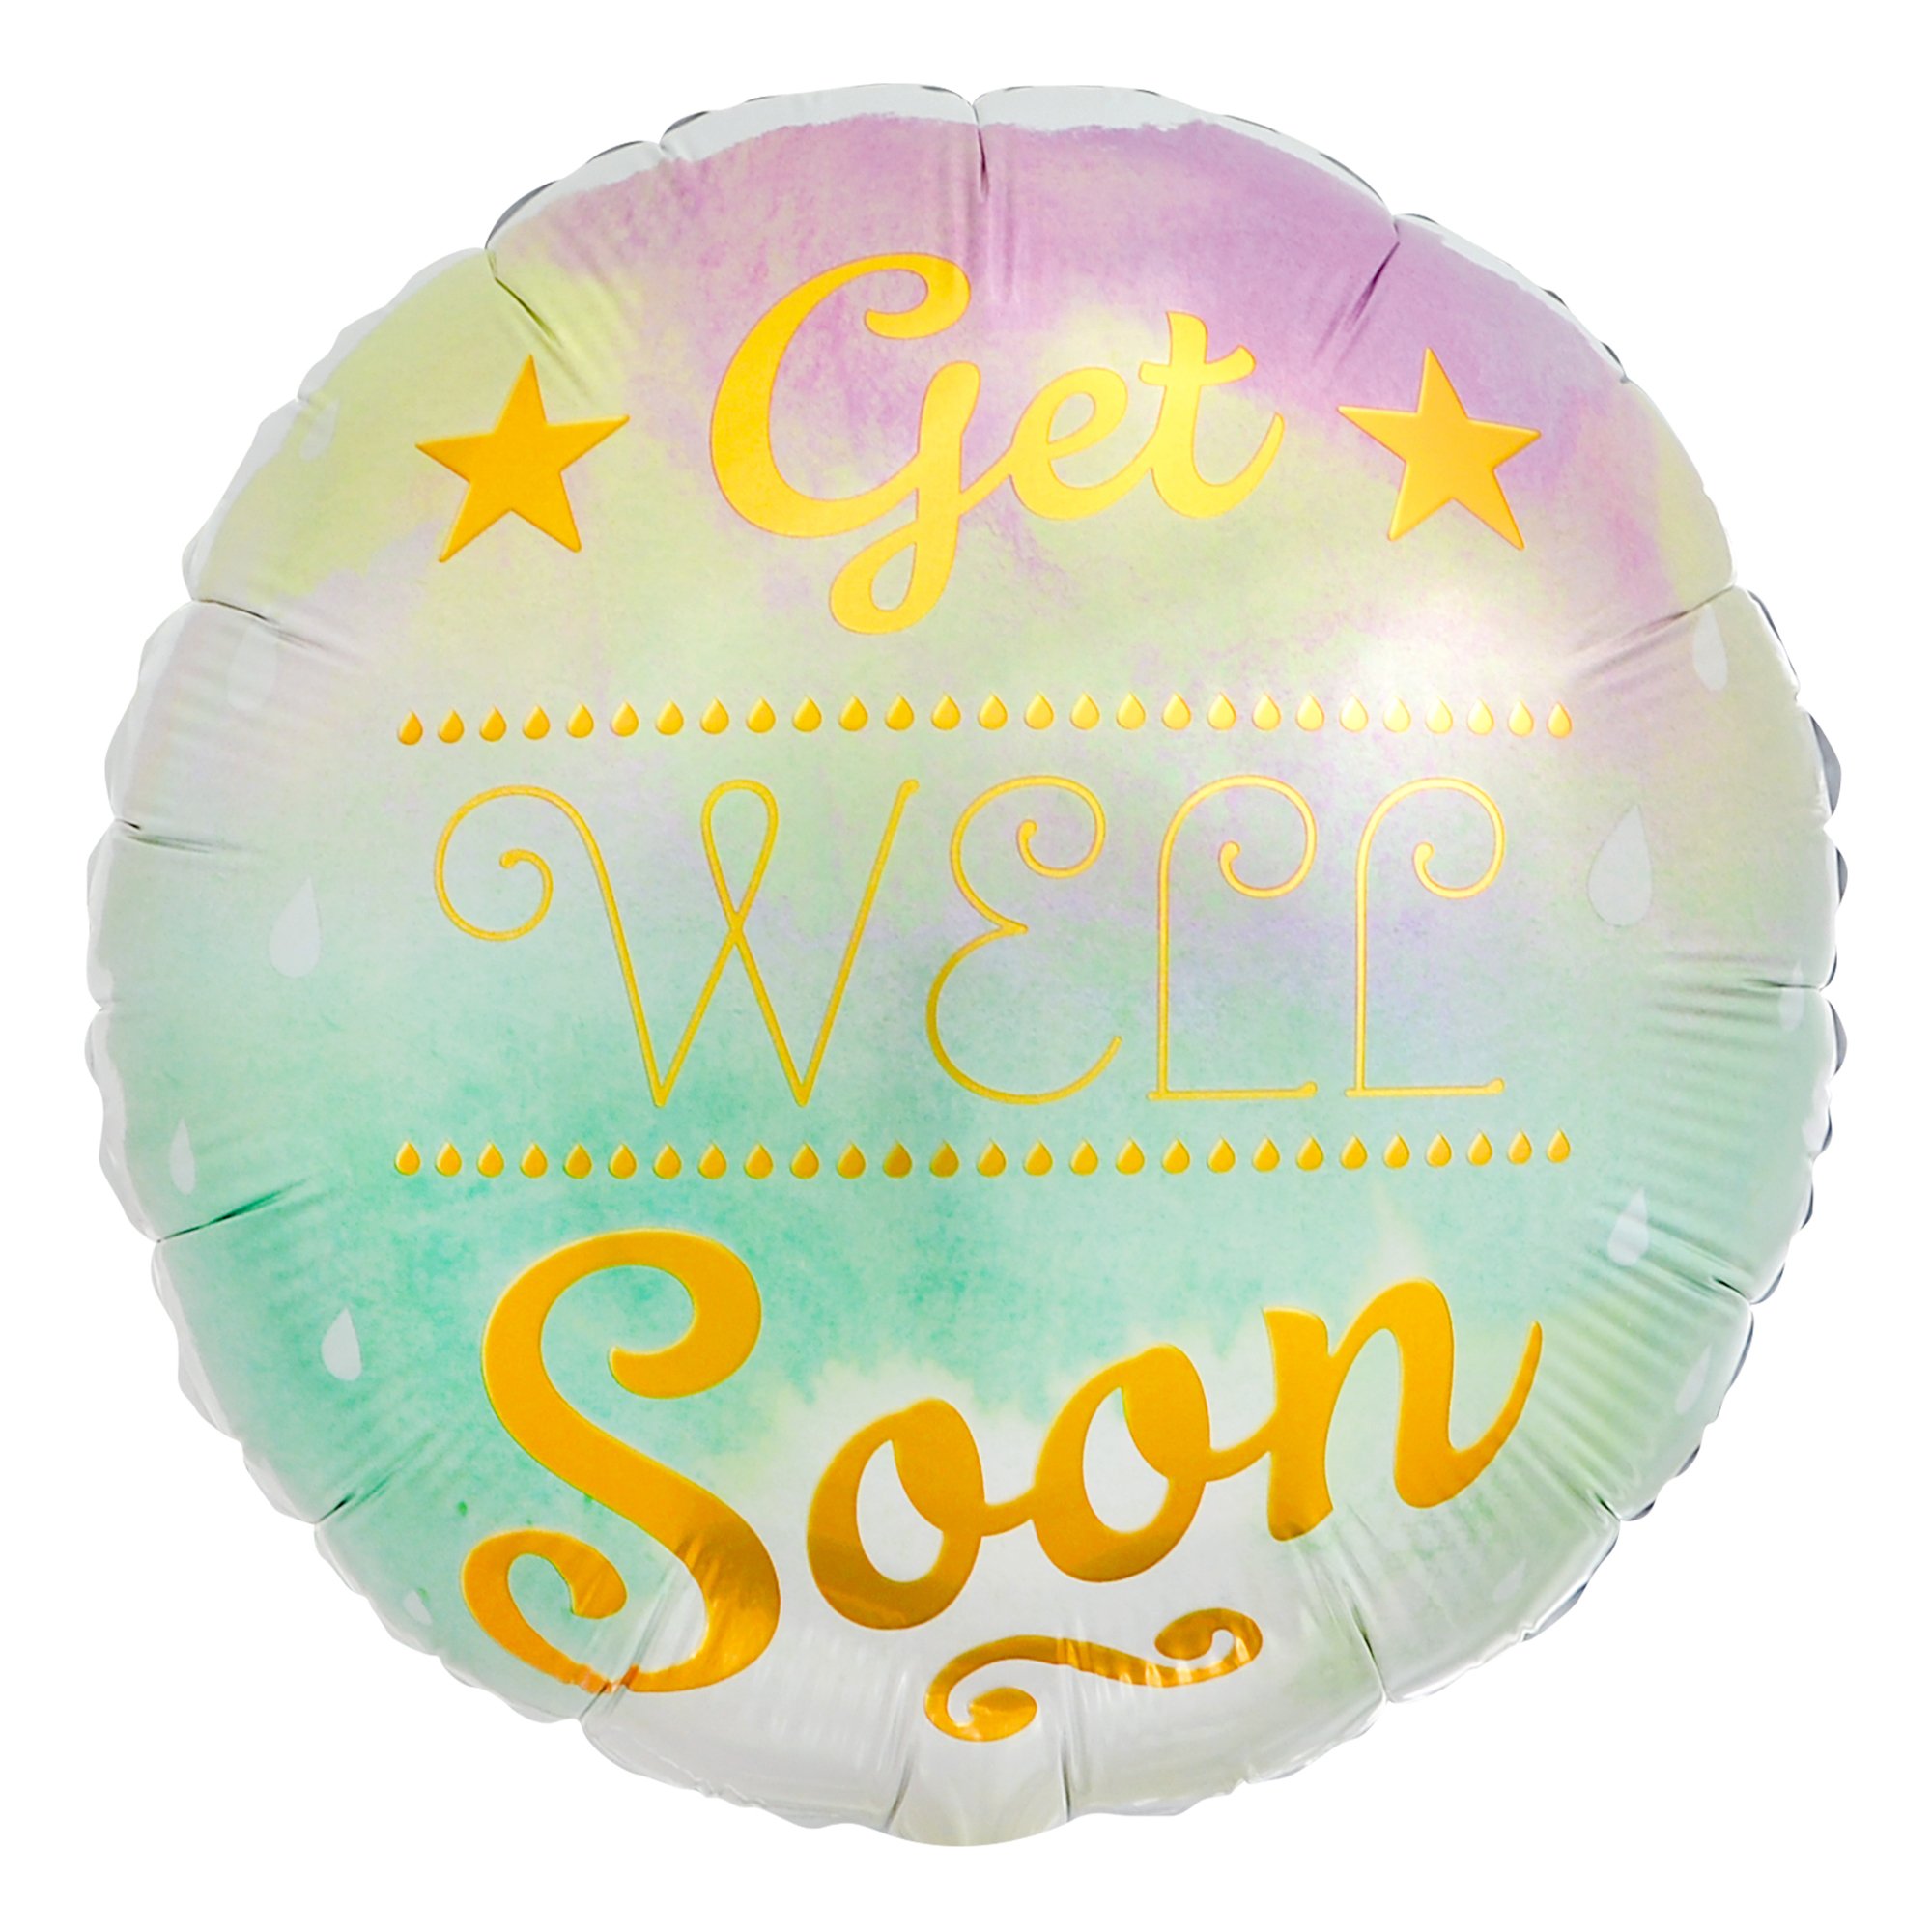 Watercolour Get Well Soon Balloon Bouquet - DELIVERED INFLATED!